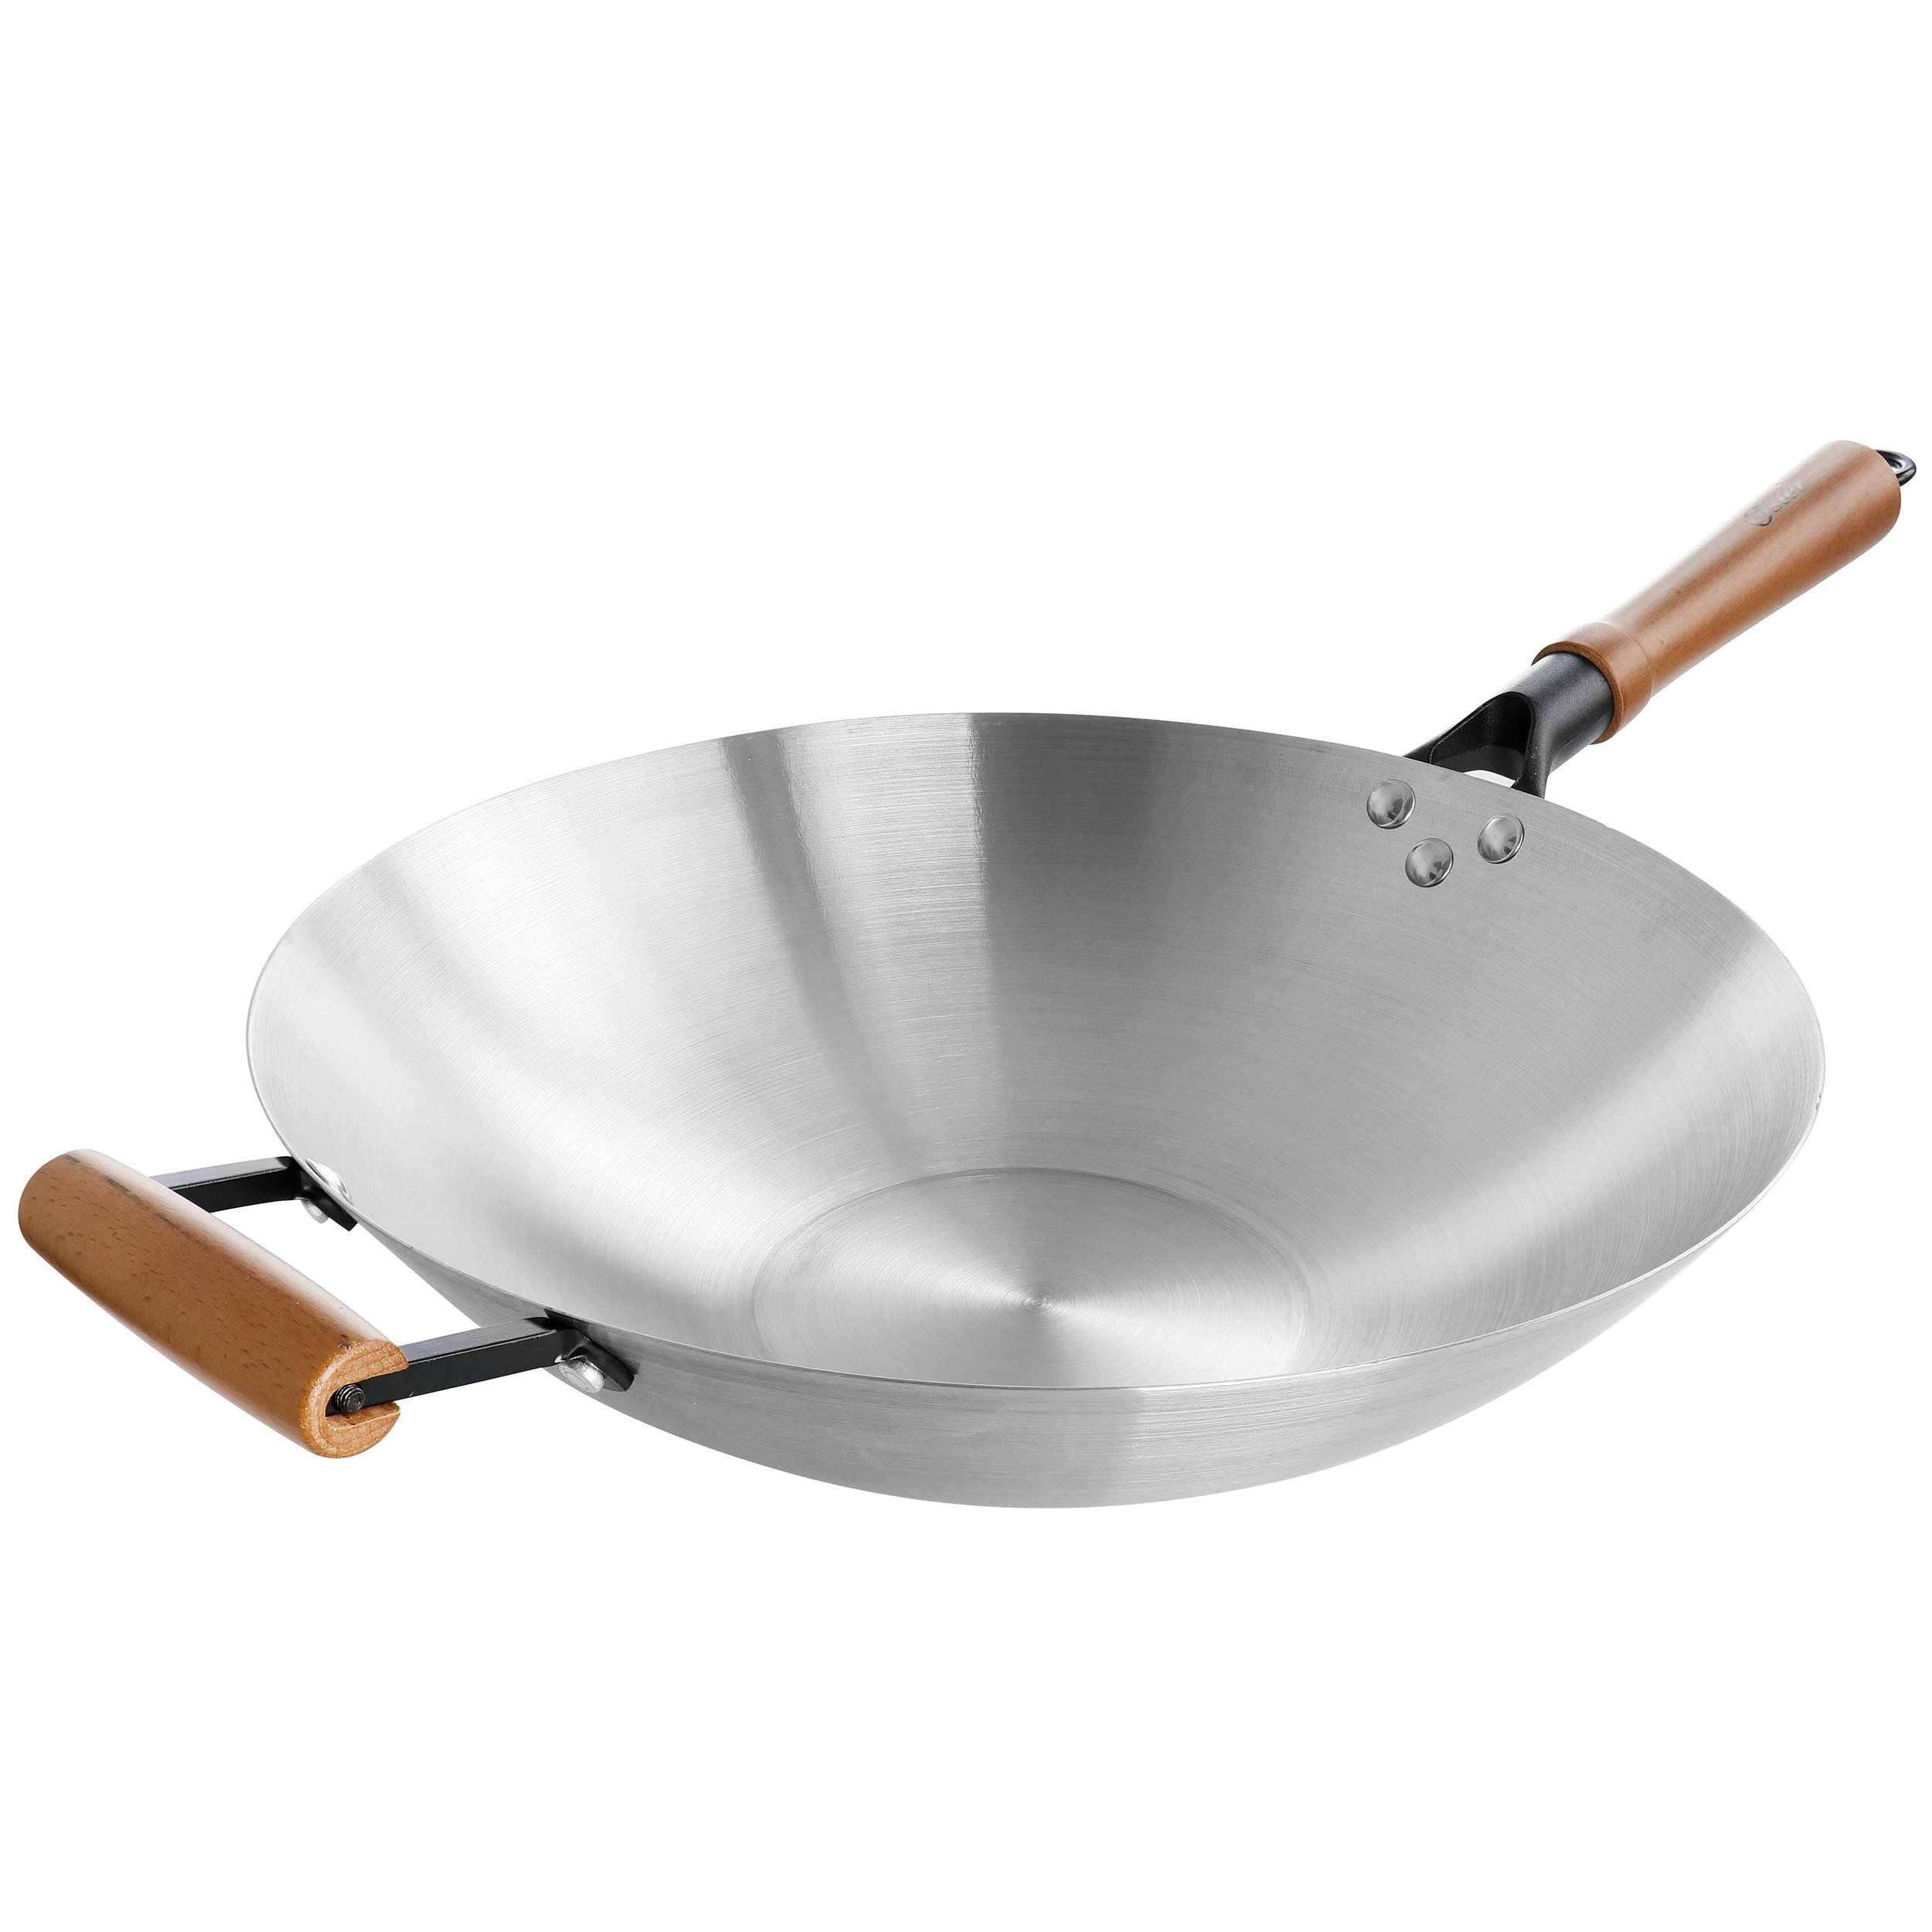 https://ak1.ostkcdn.com/images/products/is/images/direct/cf398ed34f8a426025a8482099f189113c0a35ea/14-Inch-Stainless-Steel-Wok.jpg